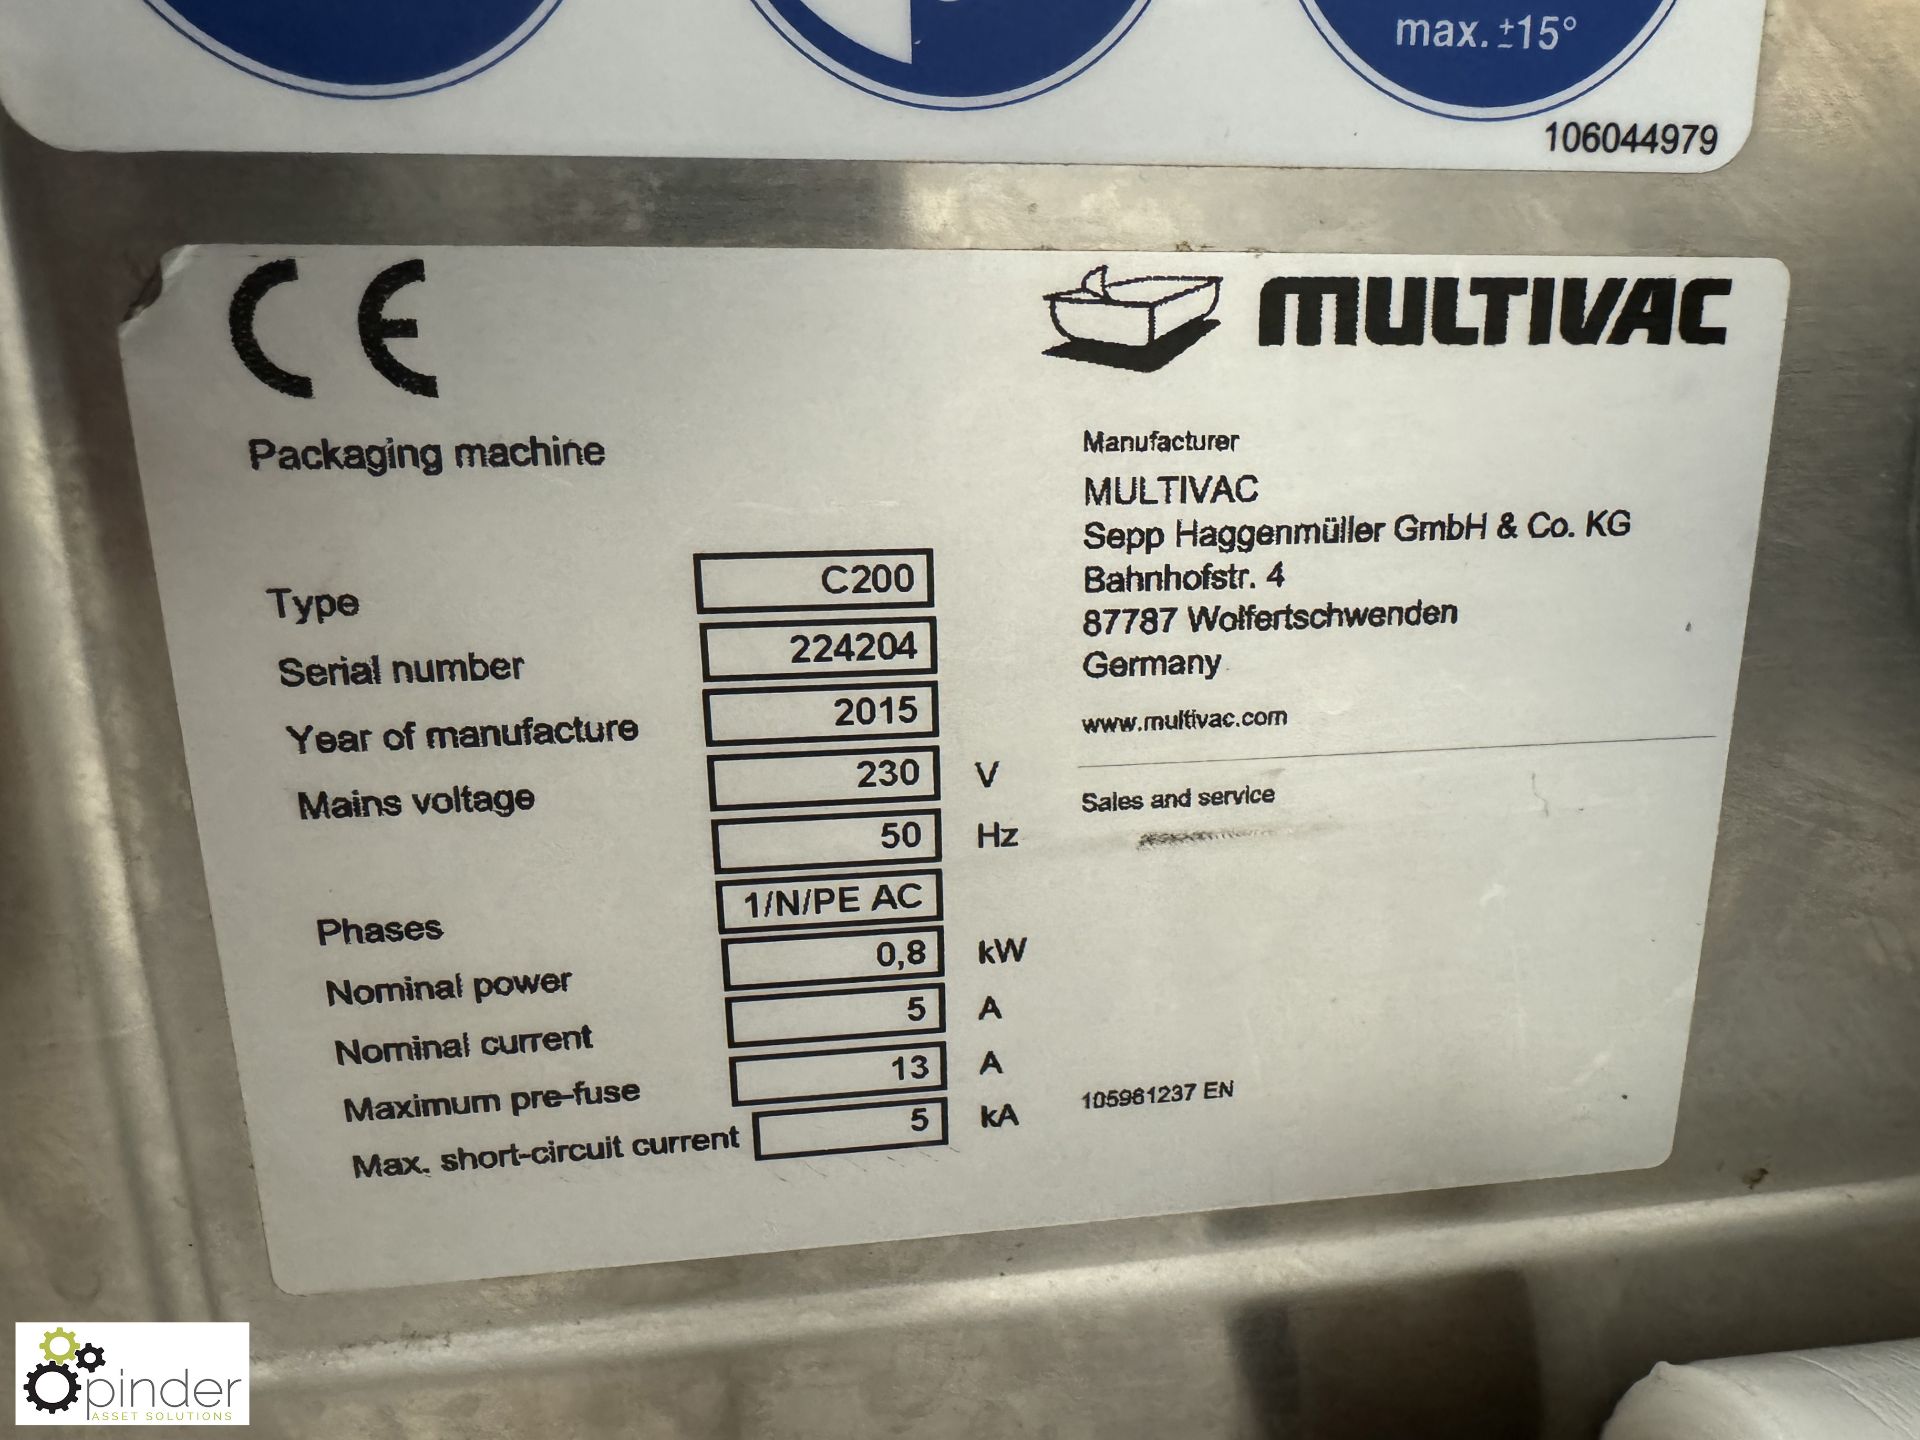 Multivac C200 counter top Vacuum Packer, 240volts, year 2015 (location in building – basement - Image 4 of 5